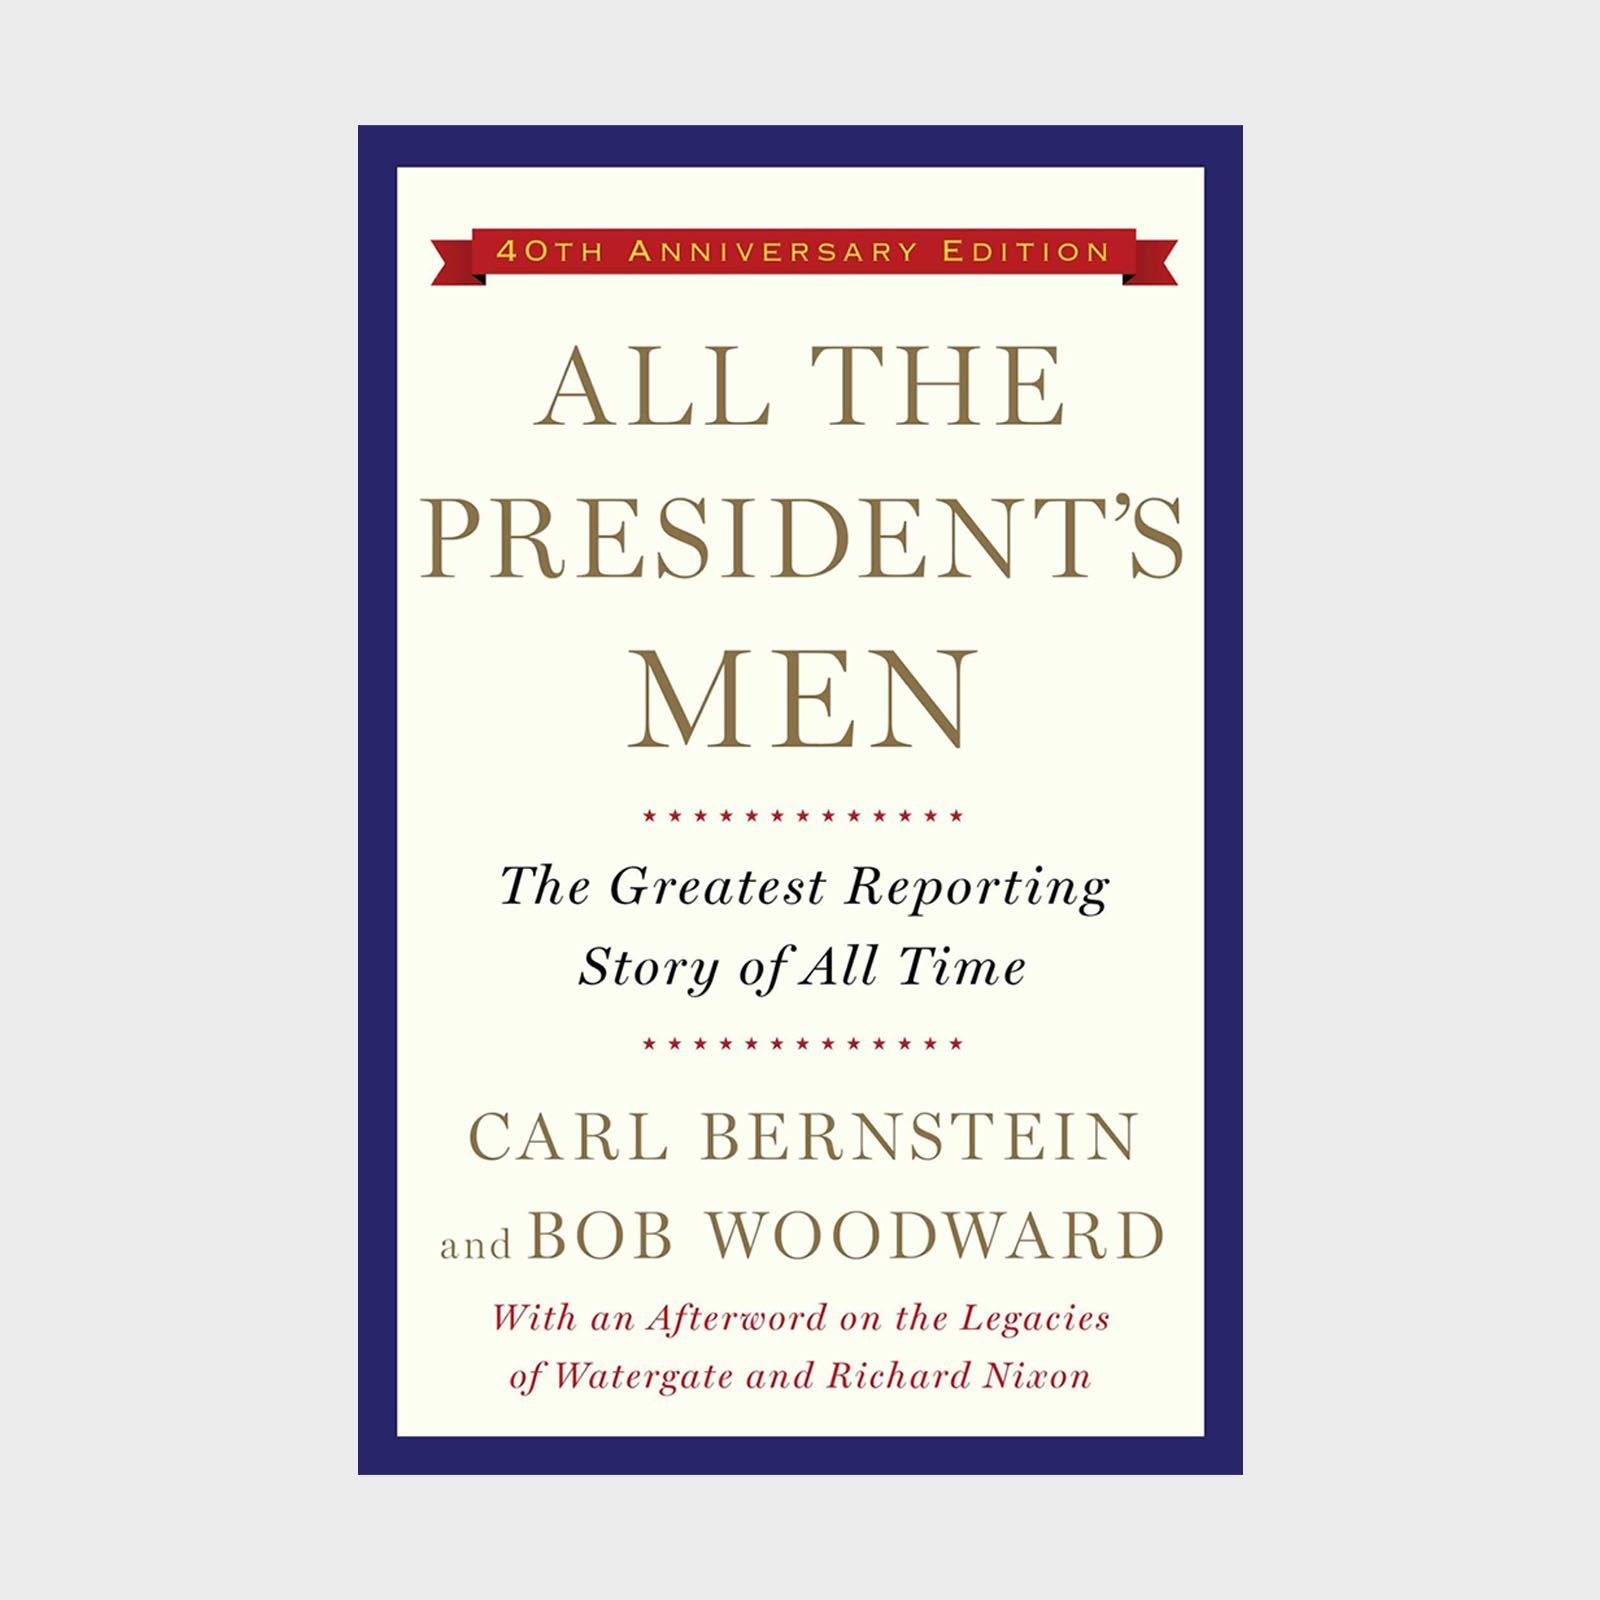 07 All The President's Men By Bob Woodward And Carl Bernstein Via Amazon